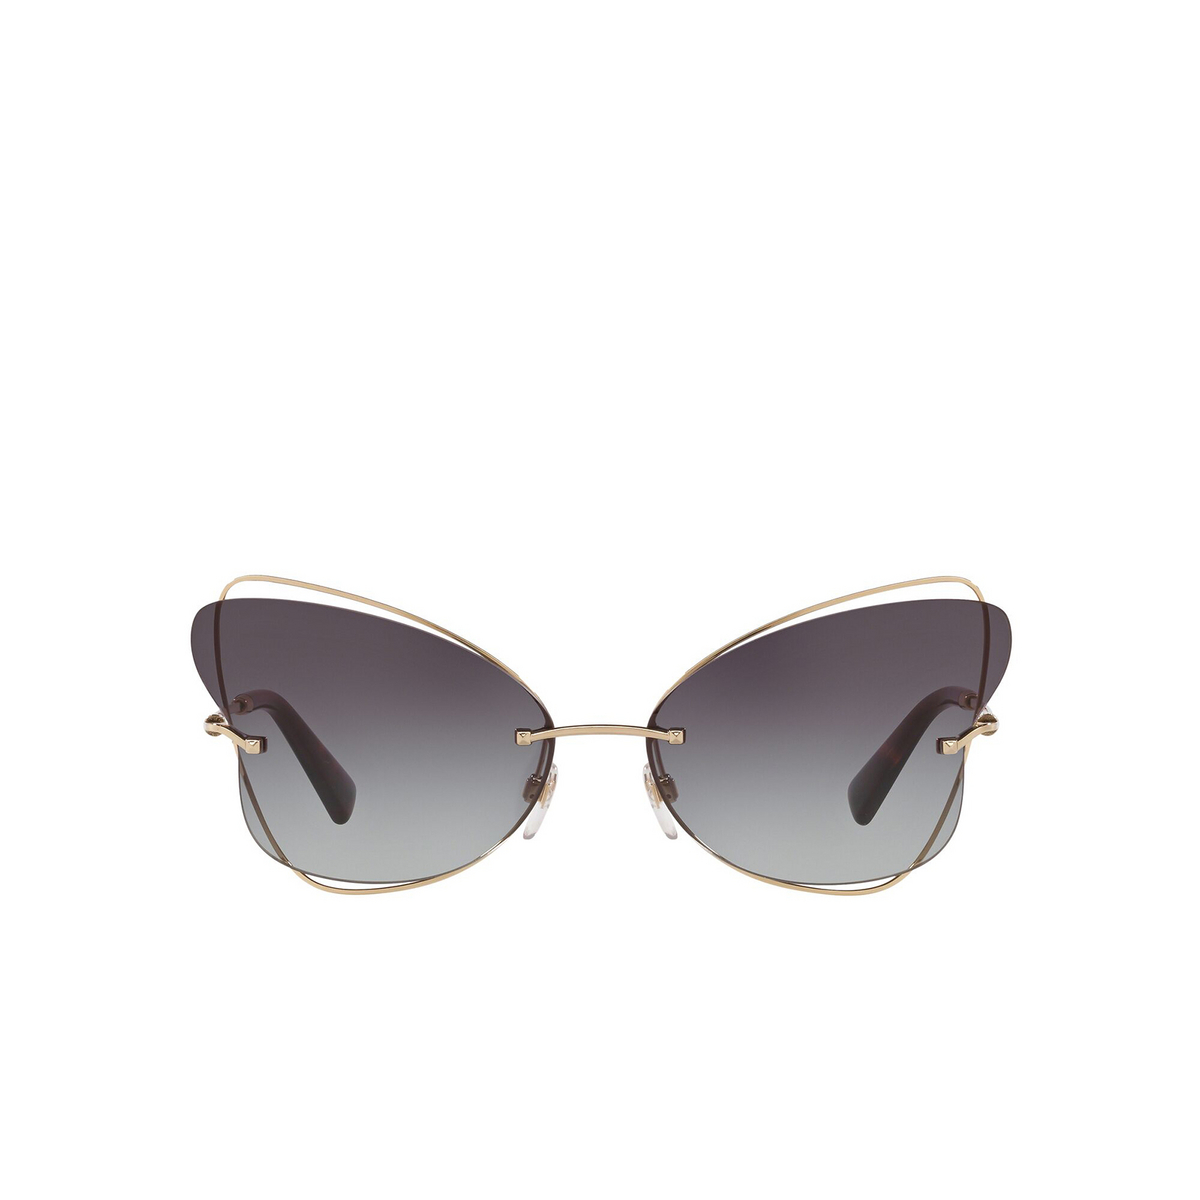 Valentino® Butterfly Sunglasses: VA2031 color Pale Gold 30038G - front view.